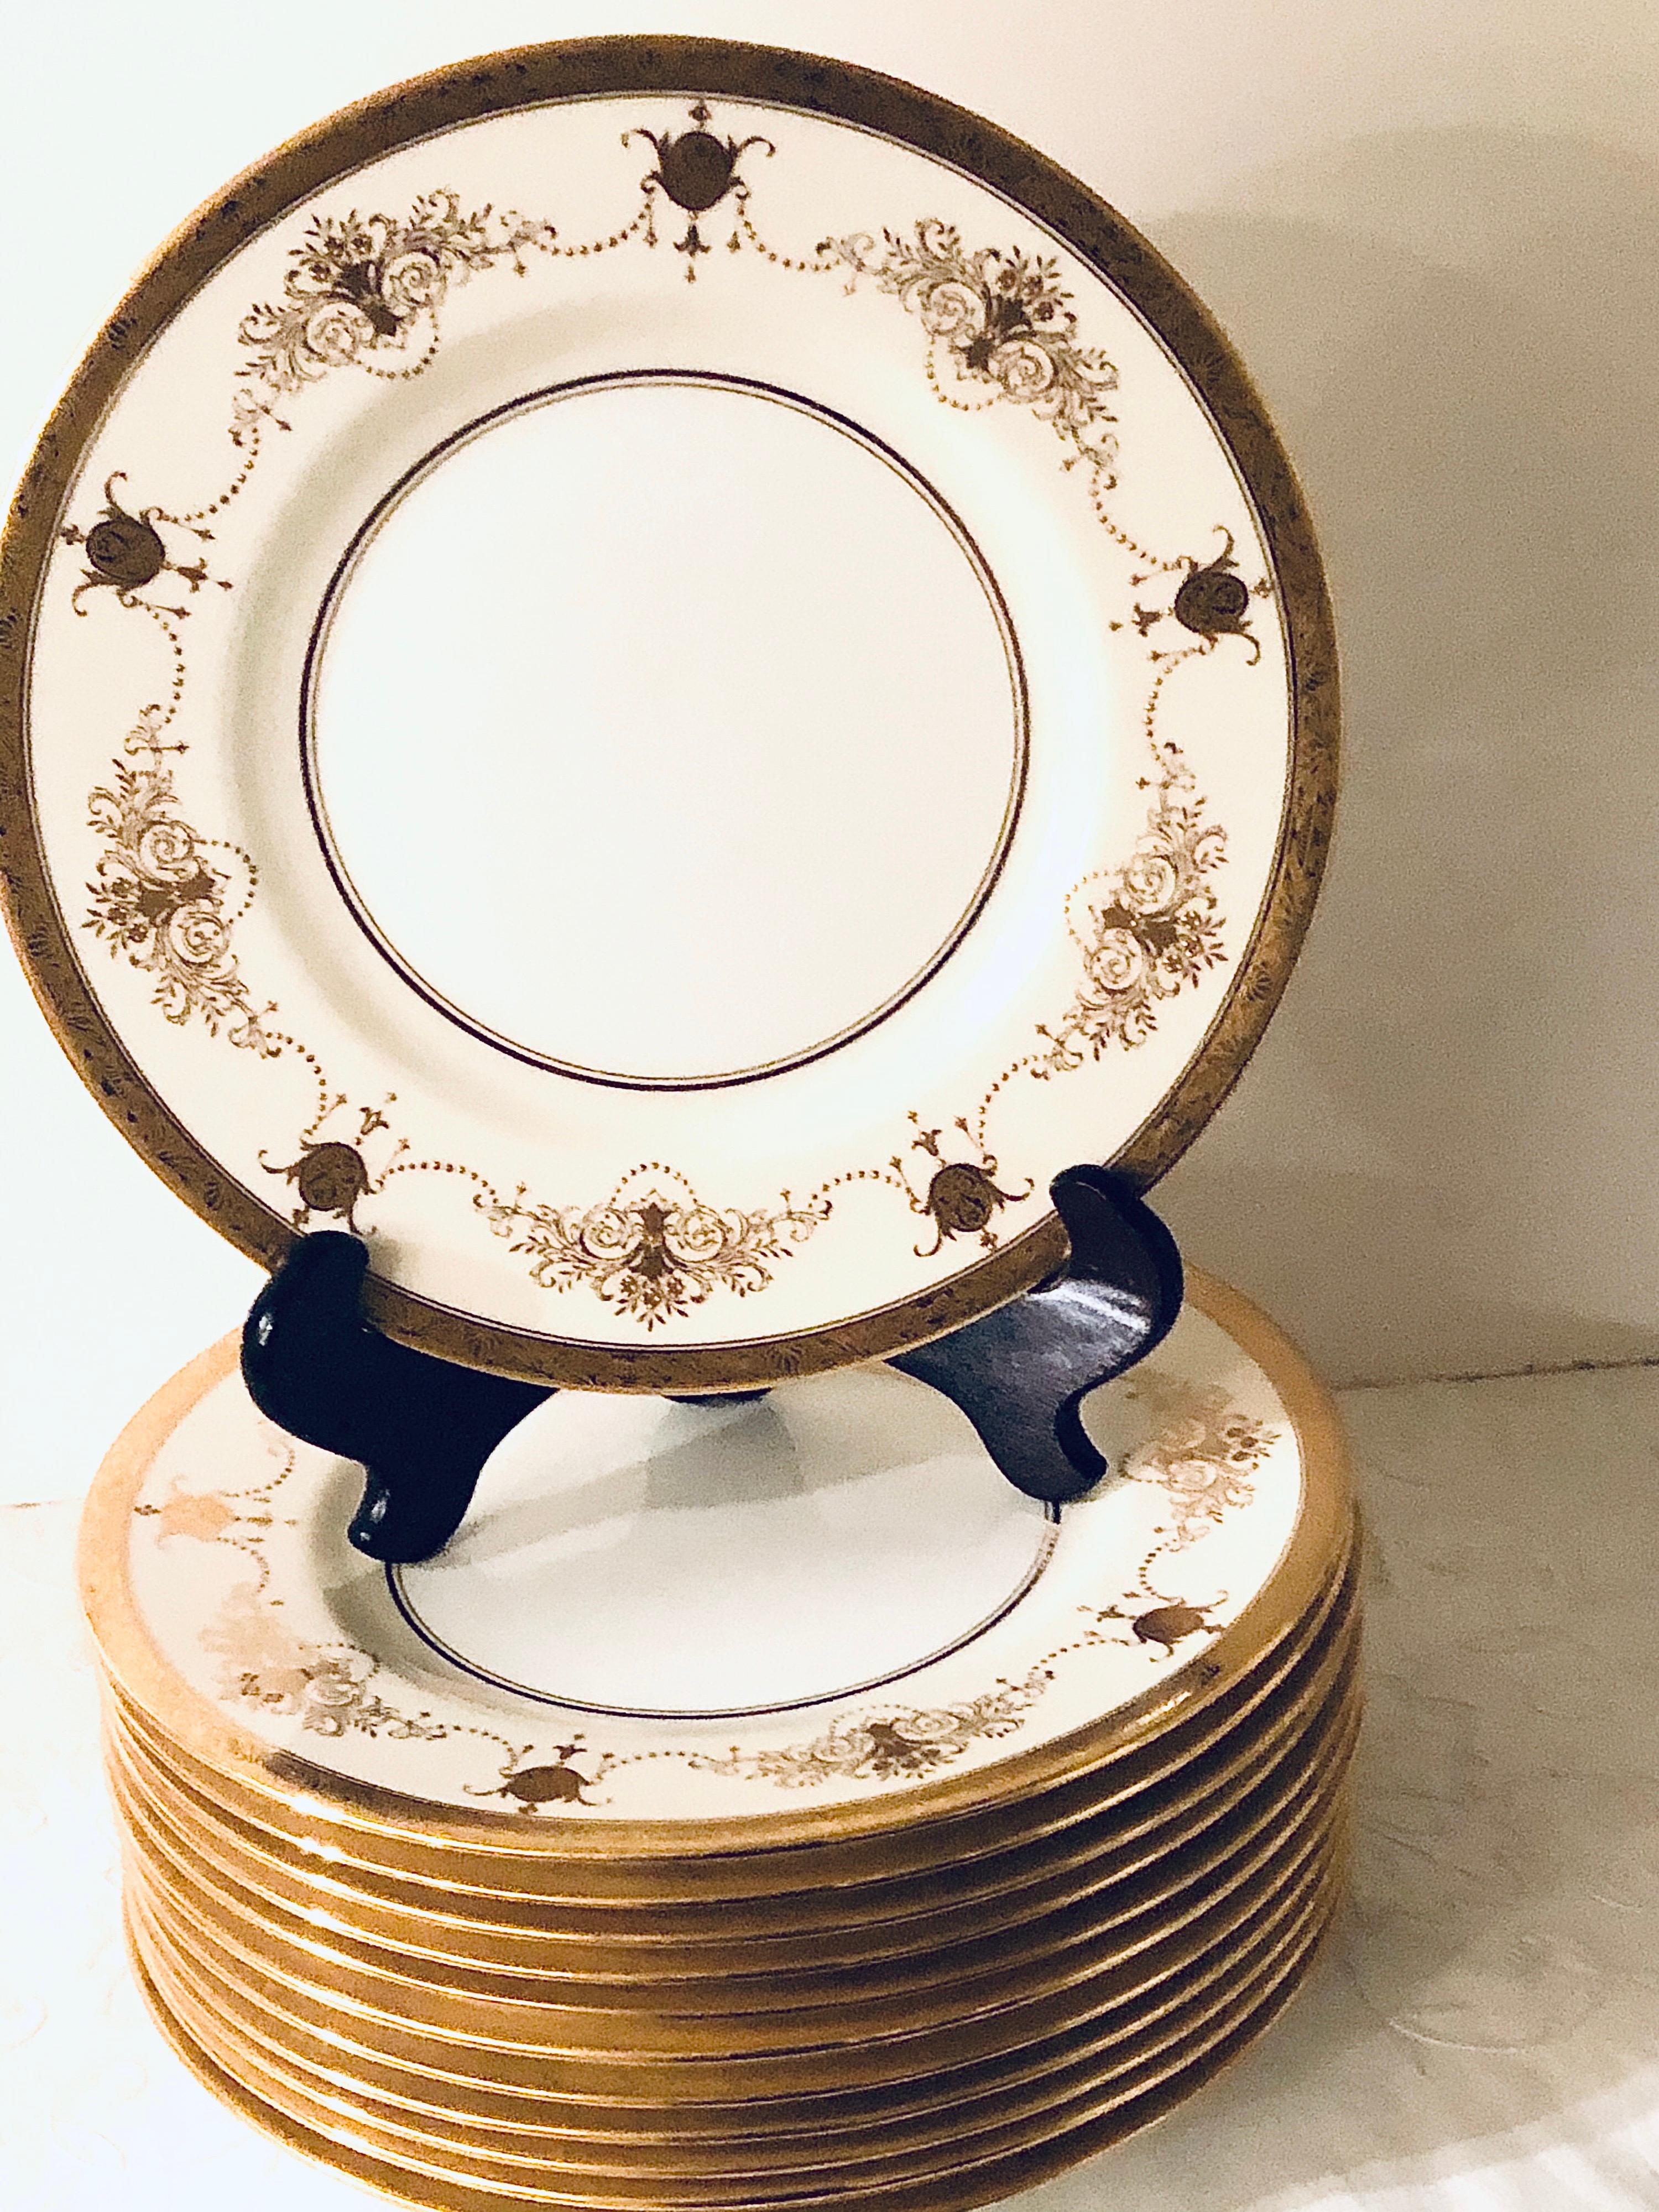 Porcelain Set of 12 Minton Dinner Plates Decorated with Ribbons of Raised Gilded Jeweling For Sale